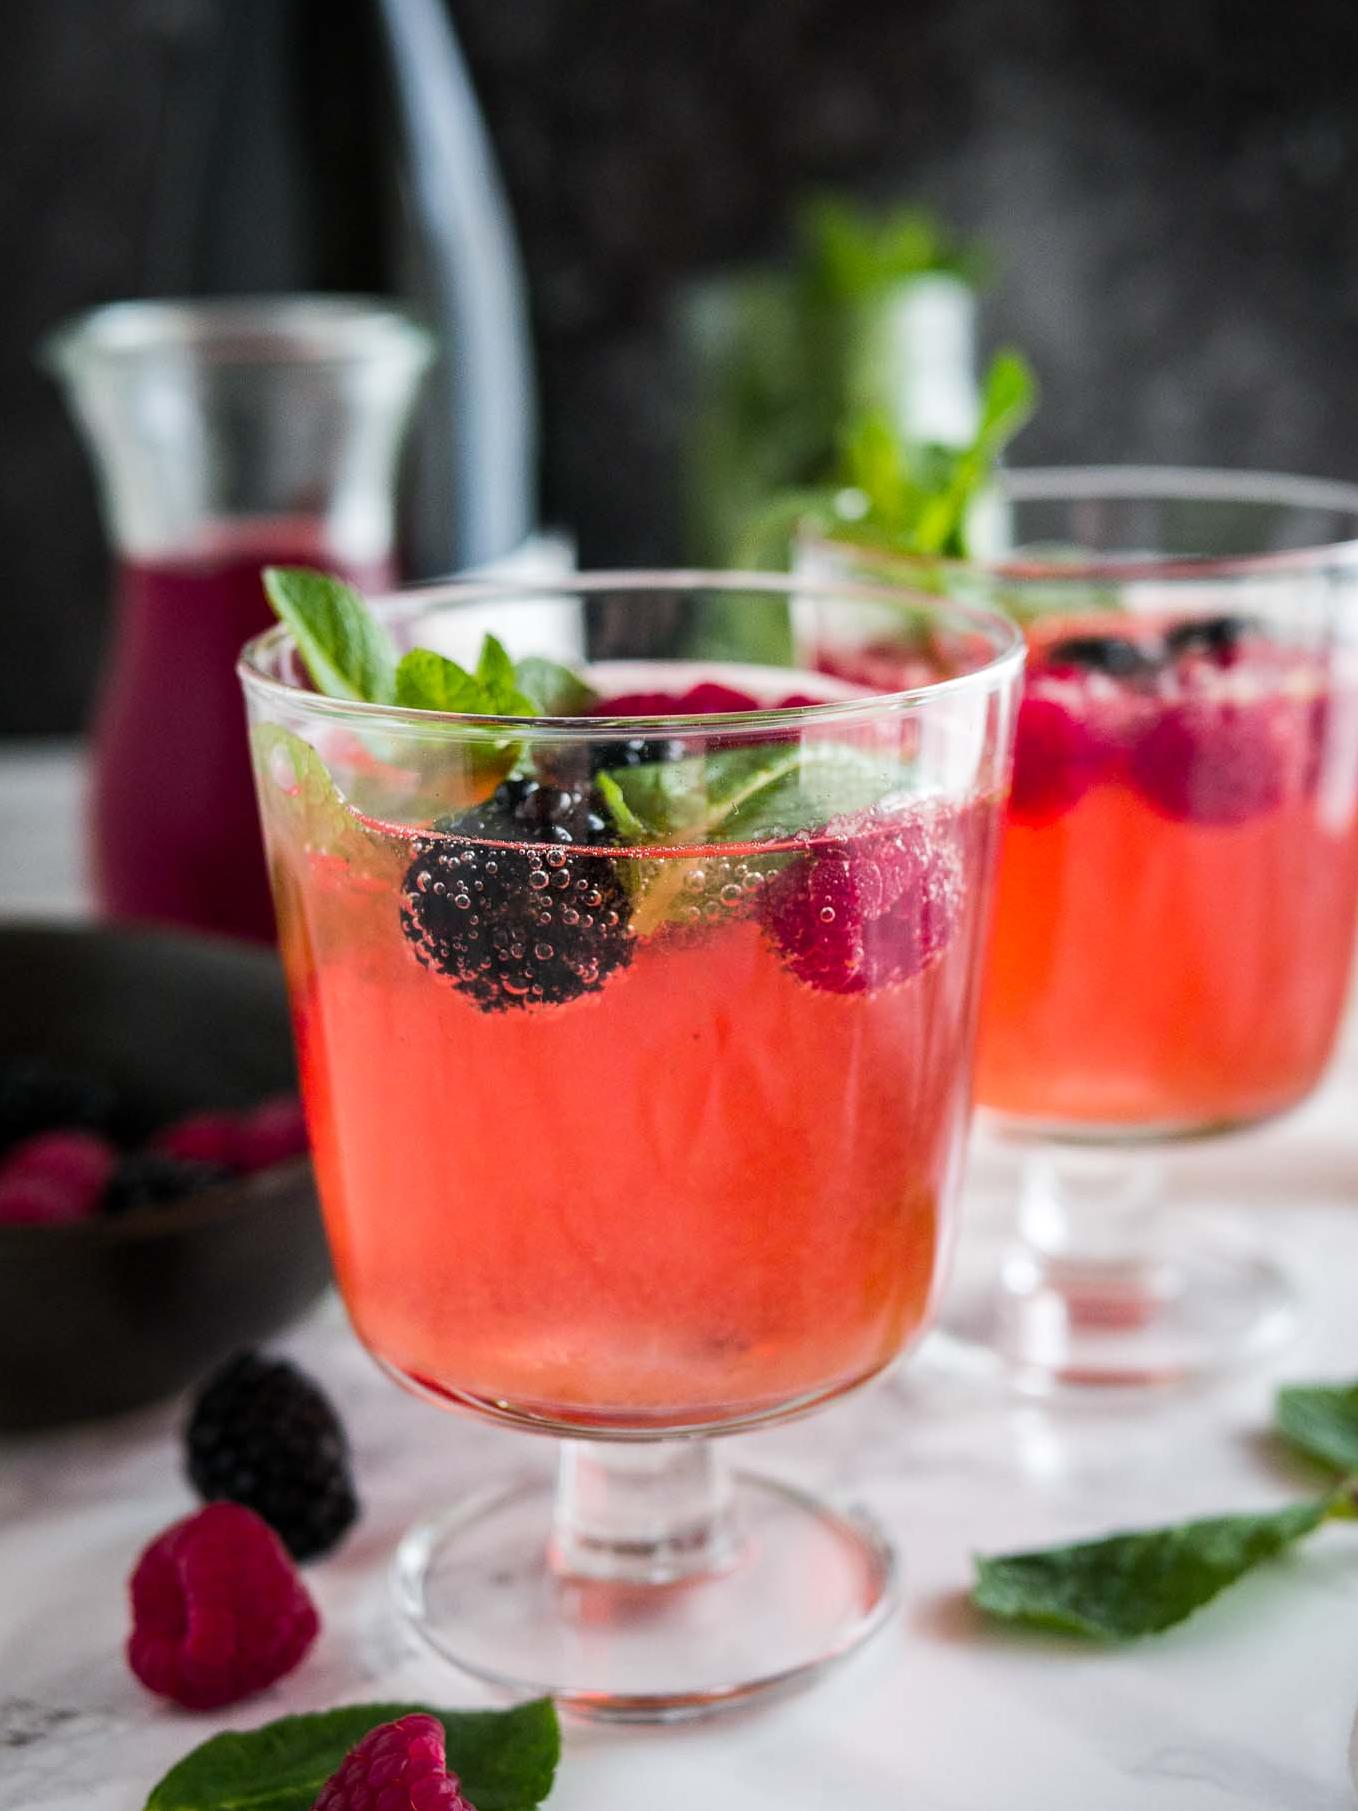  Pop the bubbly and add a splash of summer with this Berry Champagne Soda recipe!